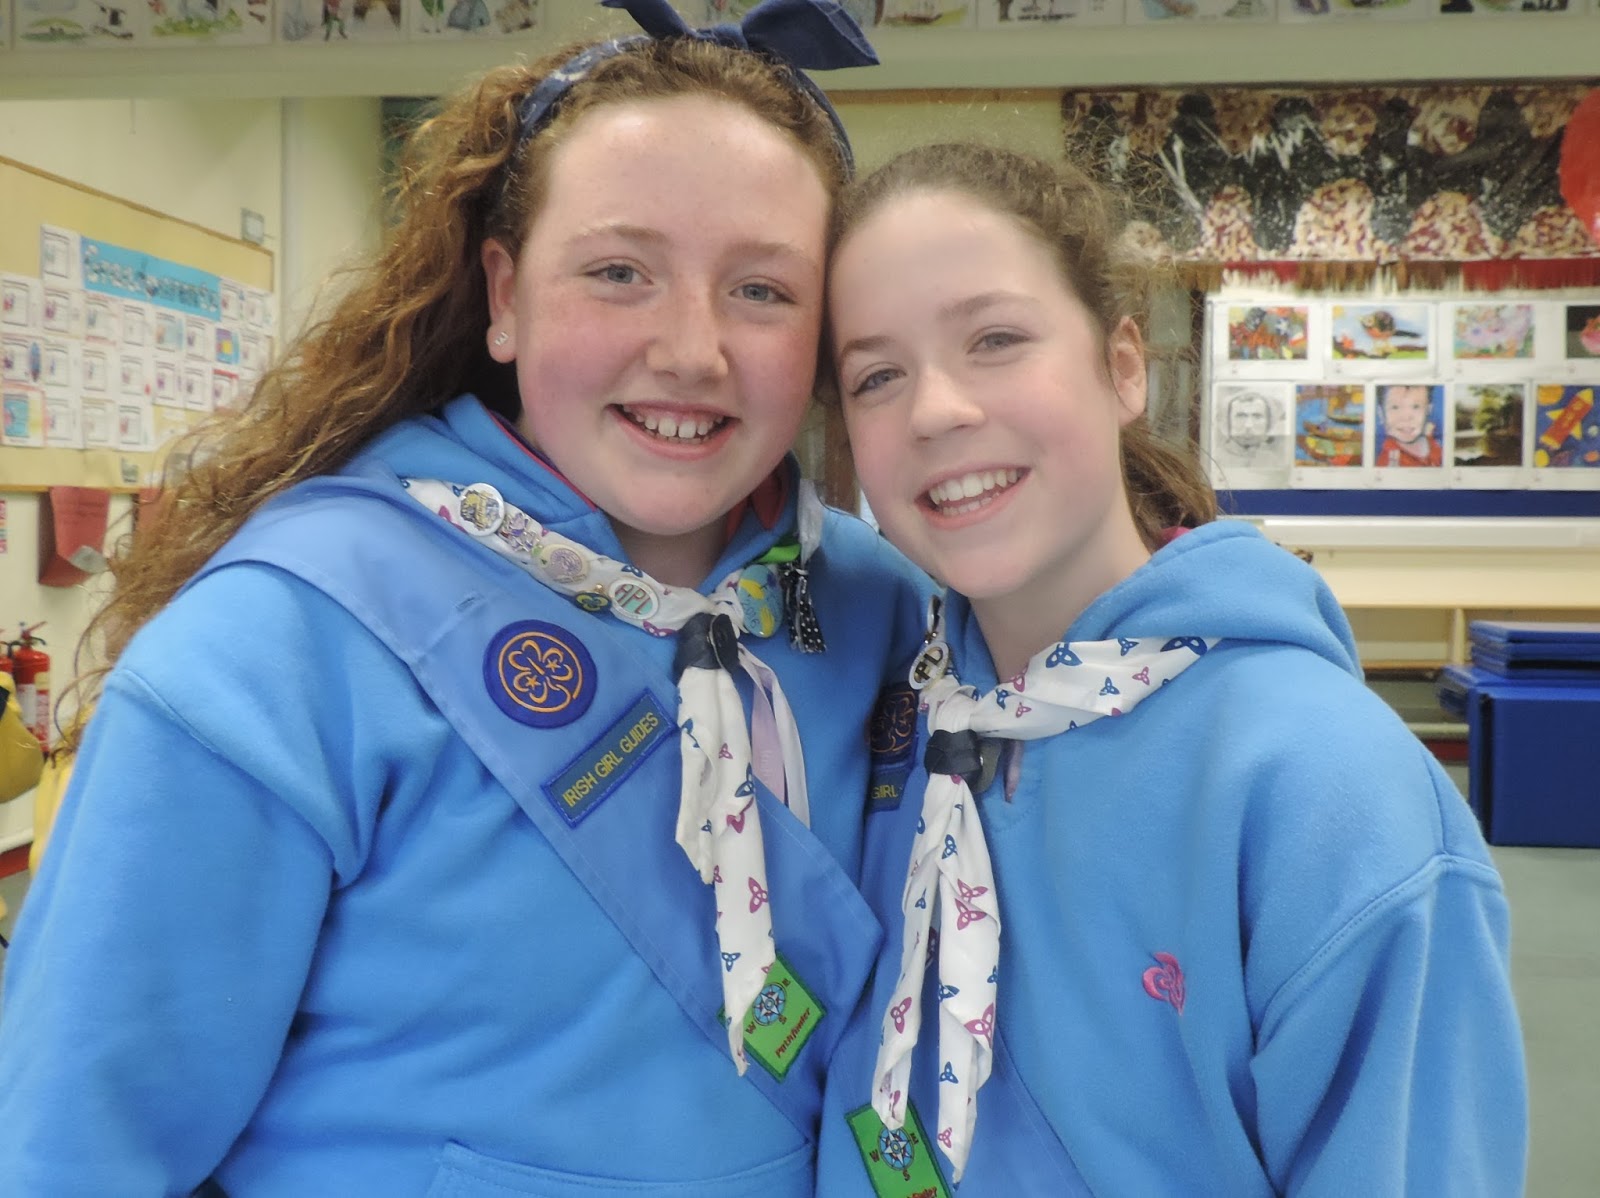 Irelands girl guide unifrorm color